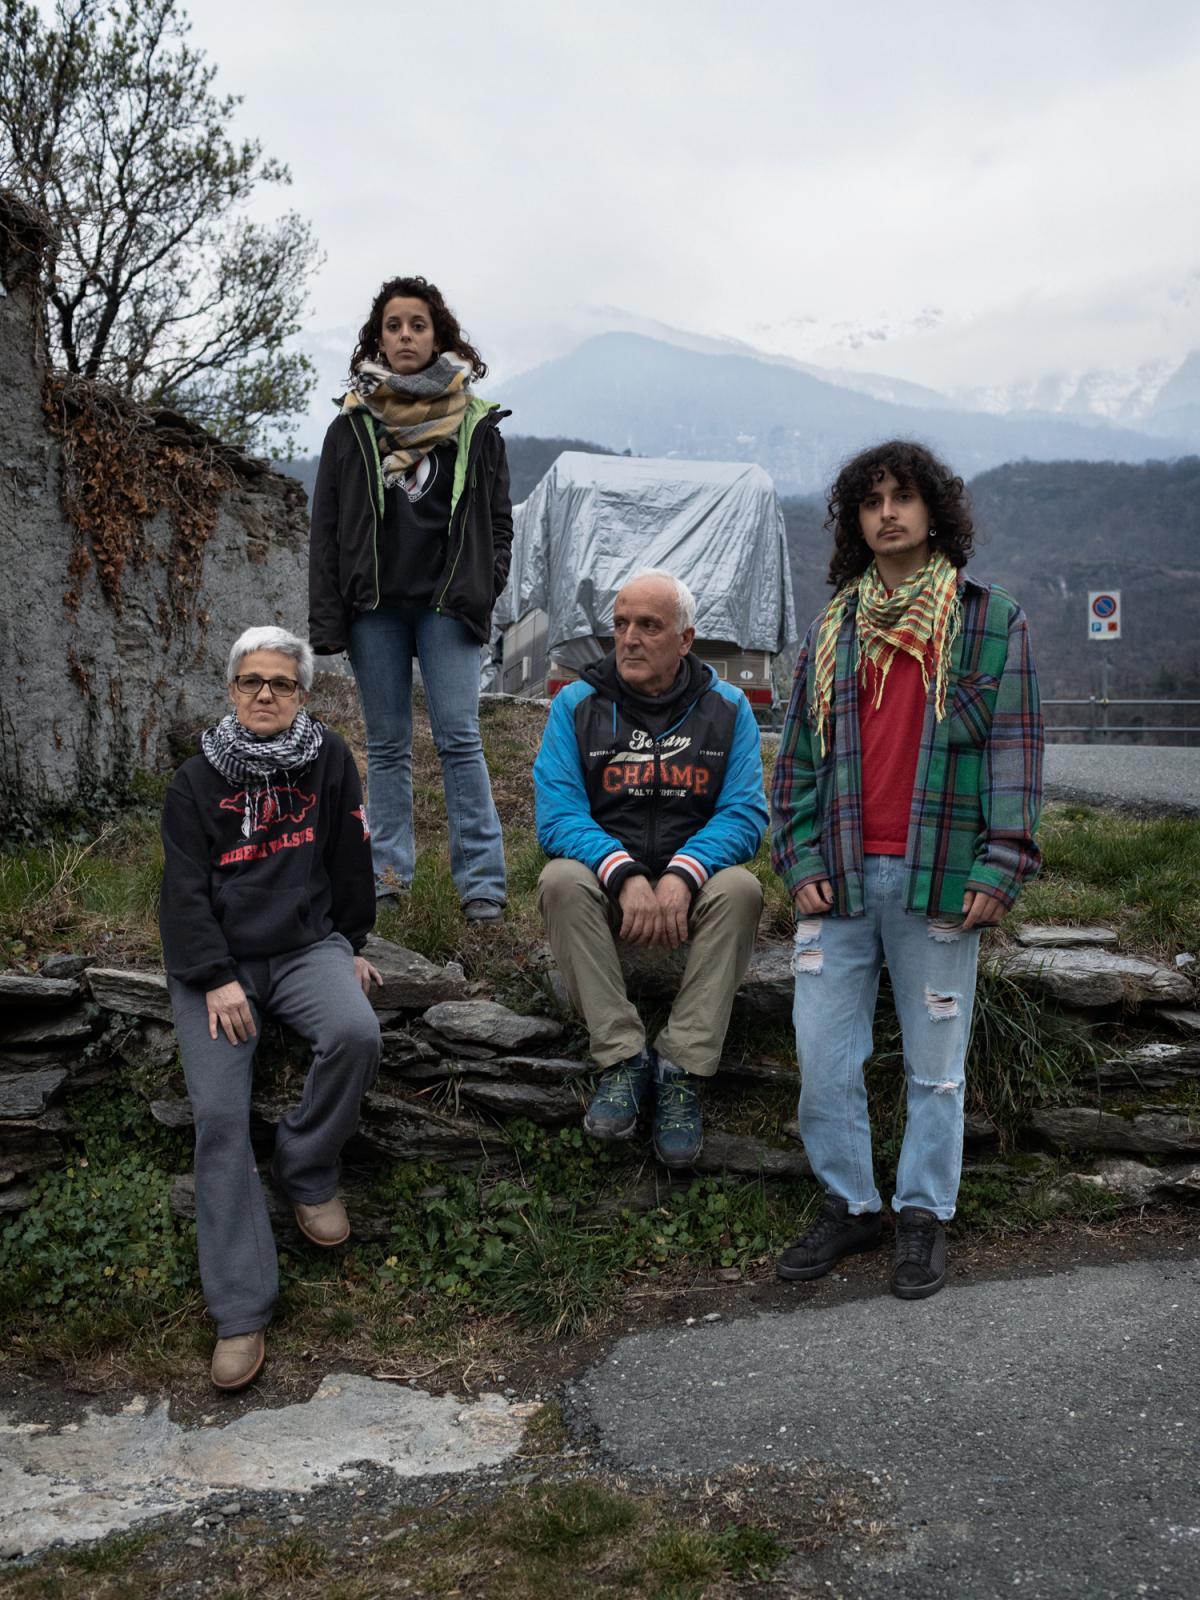 We are still dreaming  - The Olivero Fugera family. The 67-year-old father, the...